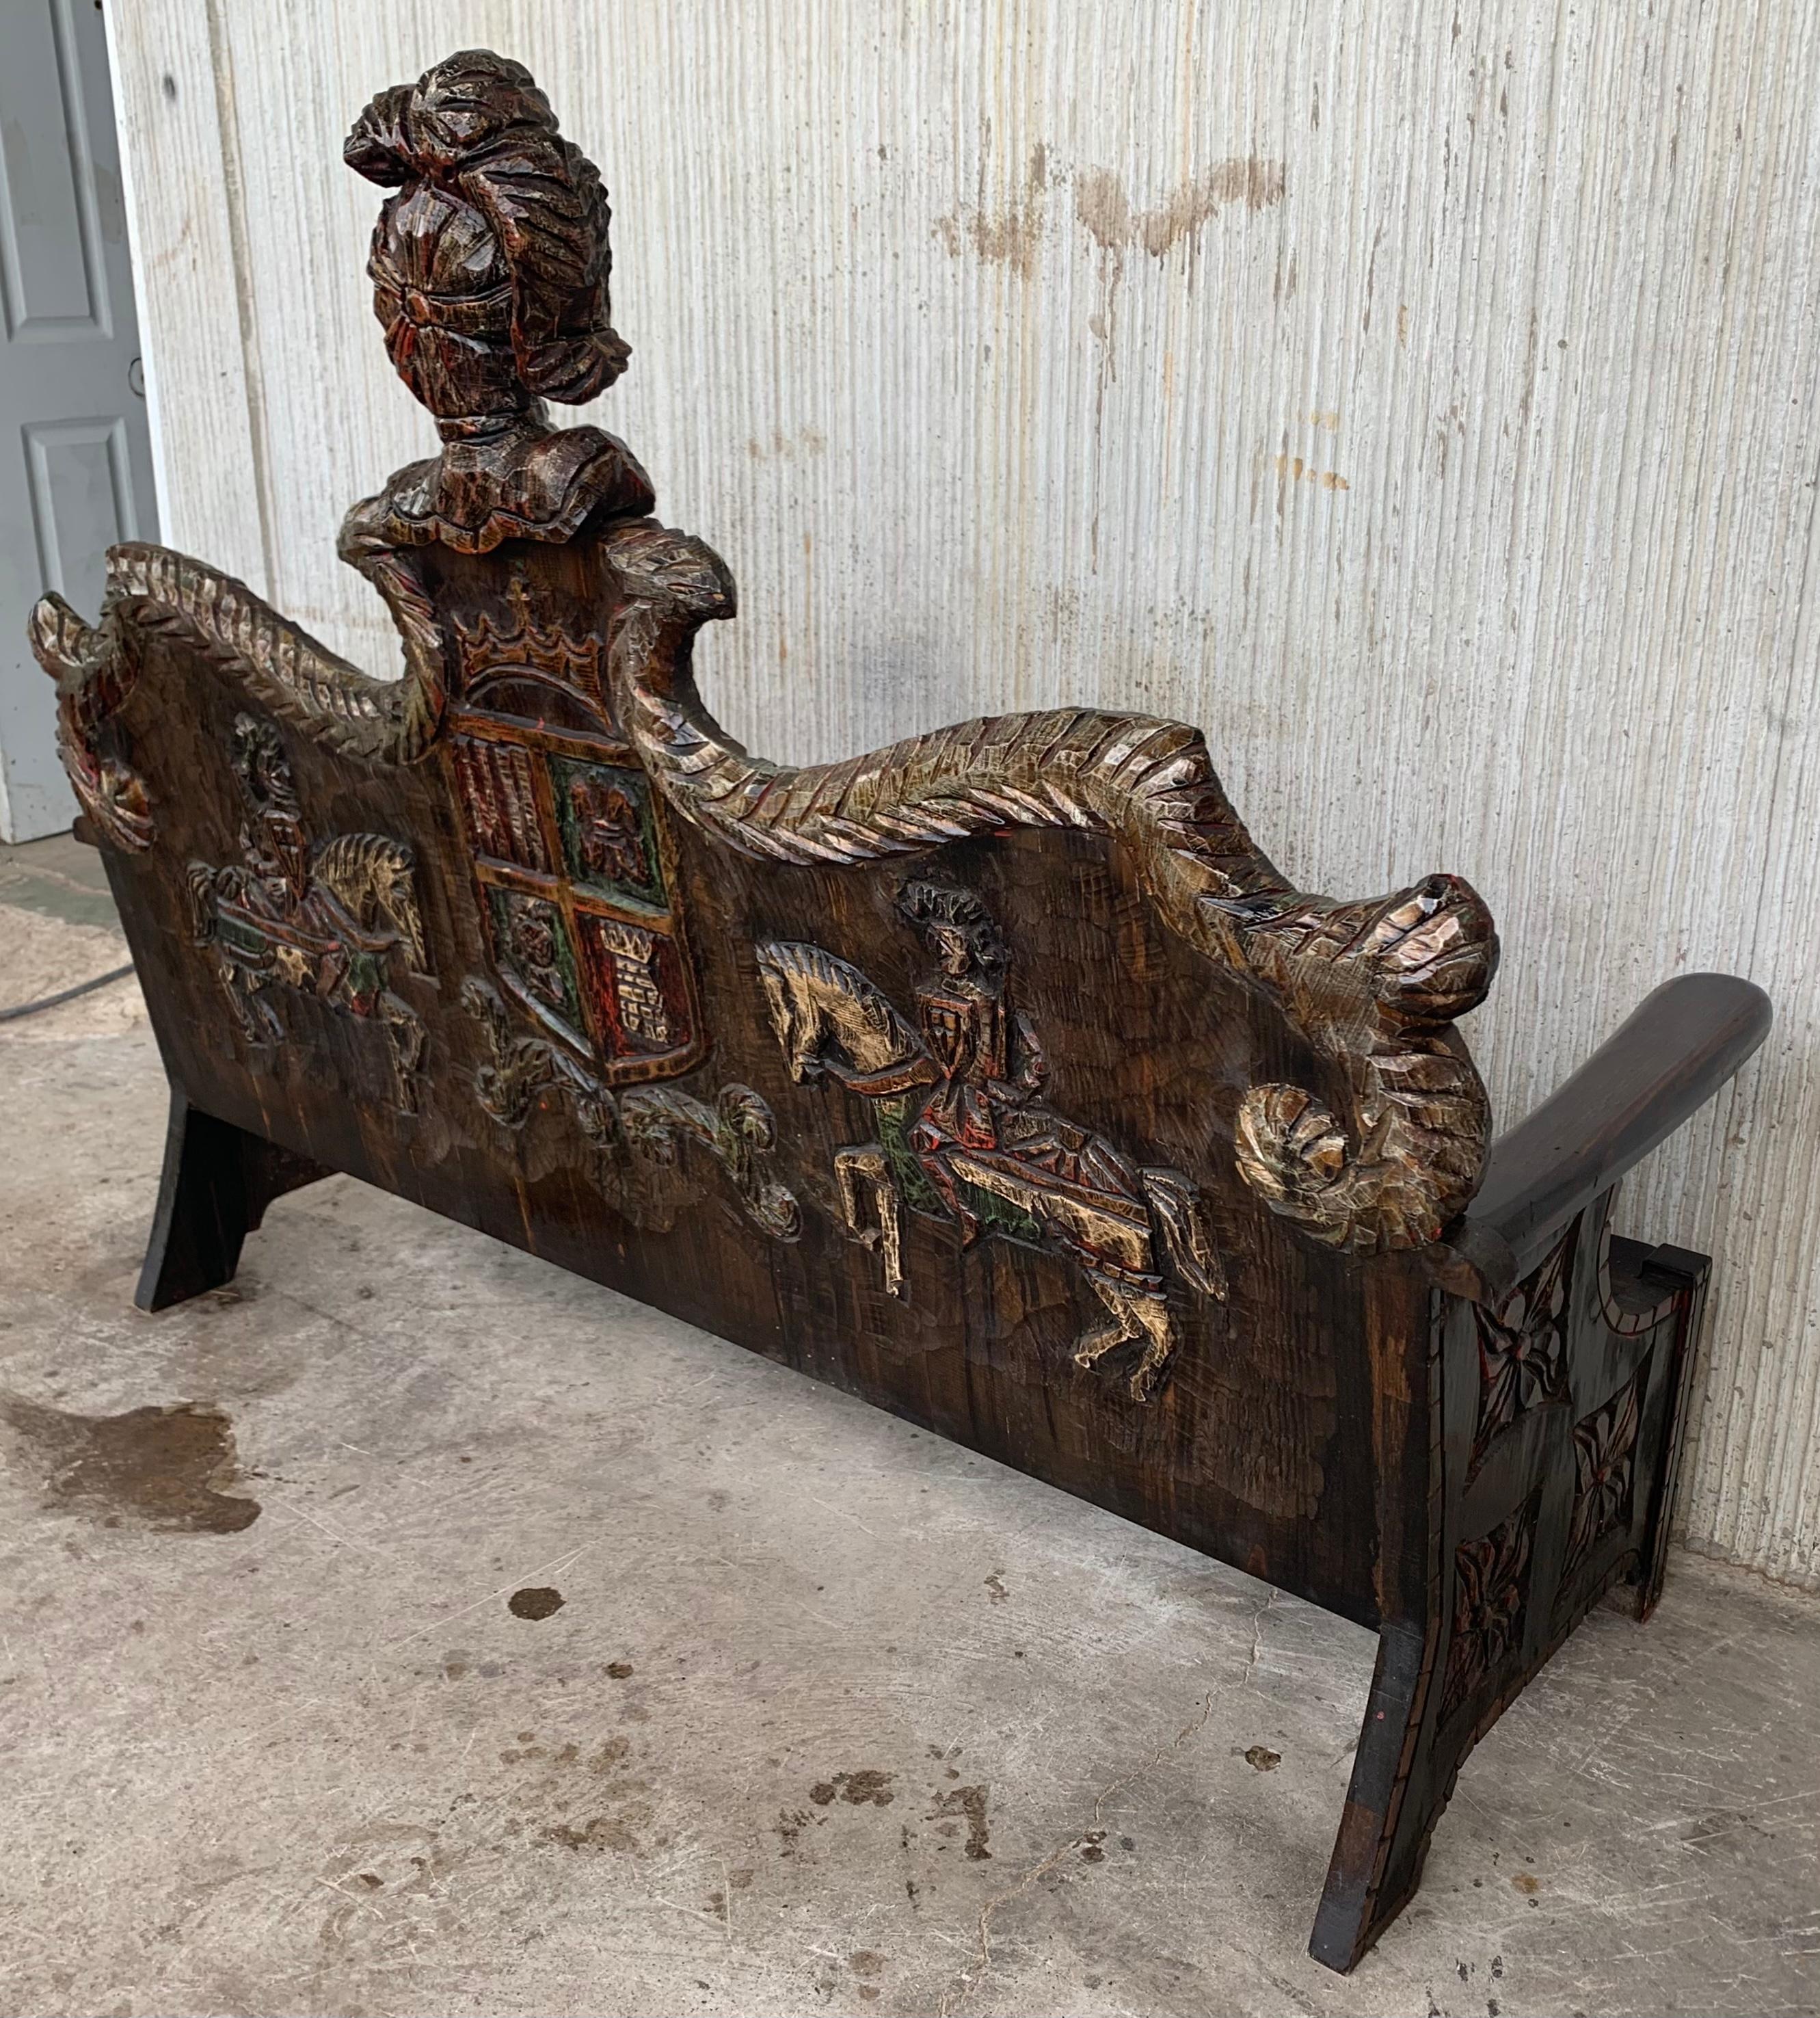 Early 20th century Spanish bench made from oak. The back is exquisitely hand carved with two differents motifs, surrounded by decorative carvings. The sides and back are made up of matching decorative pierced carvings. The seat has a beveled front